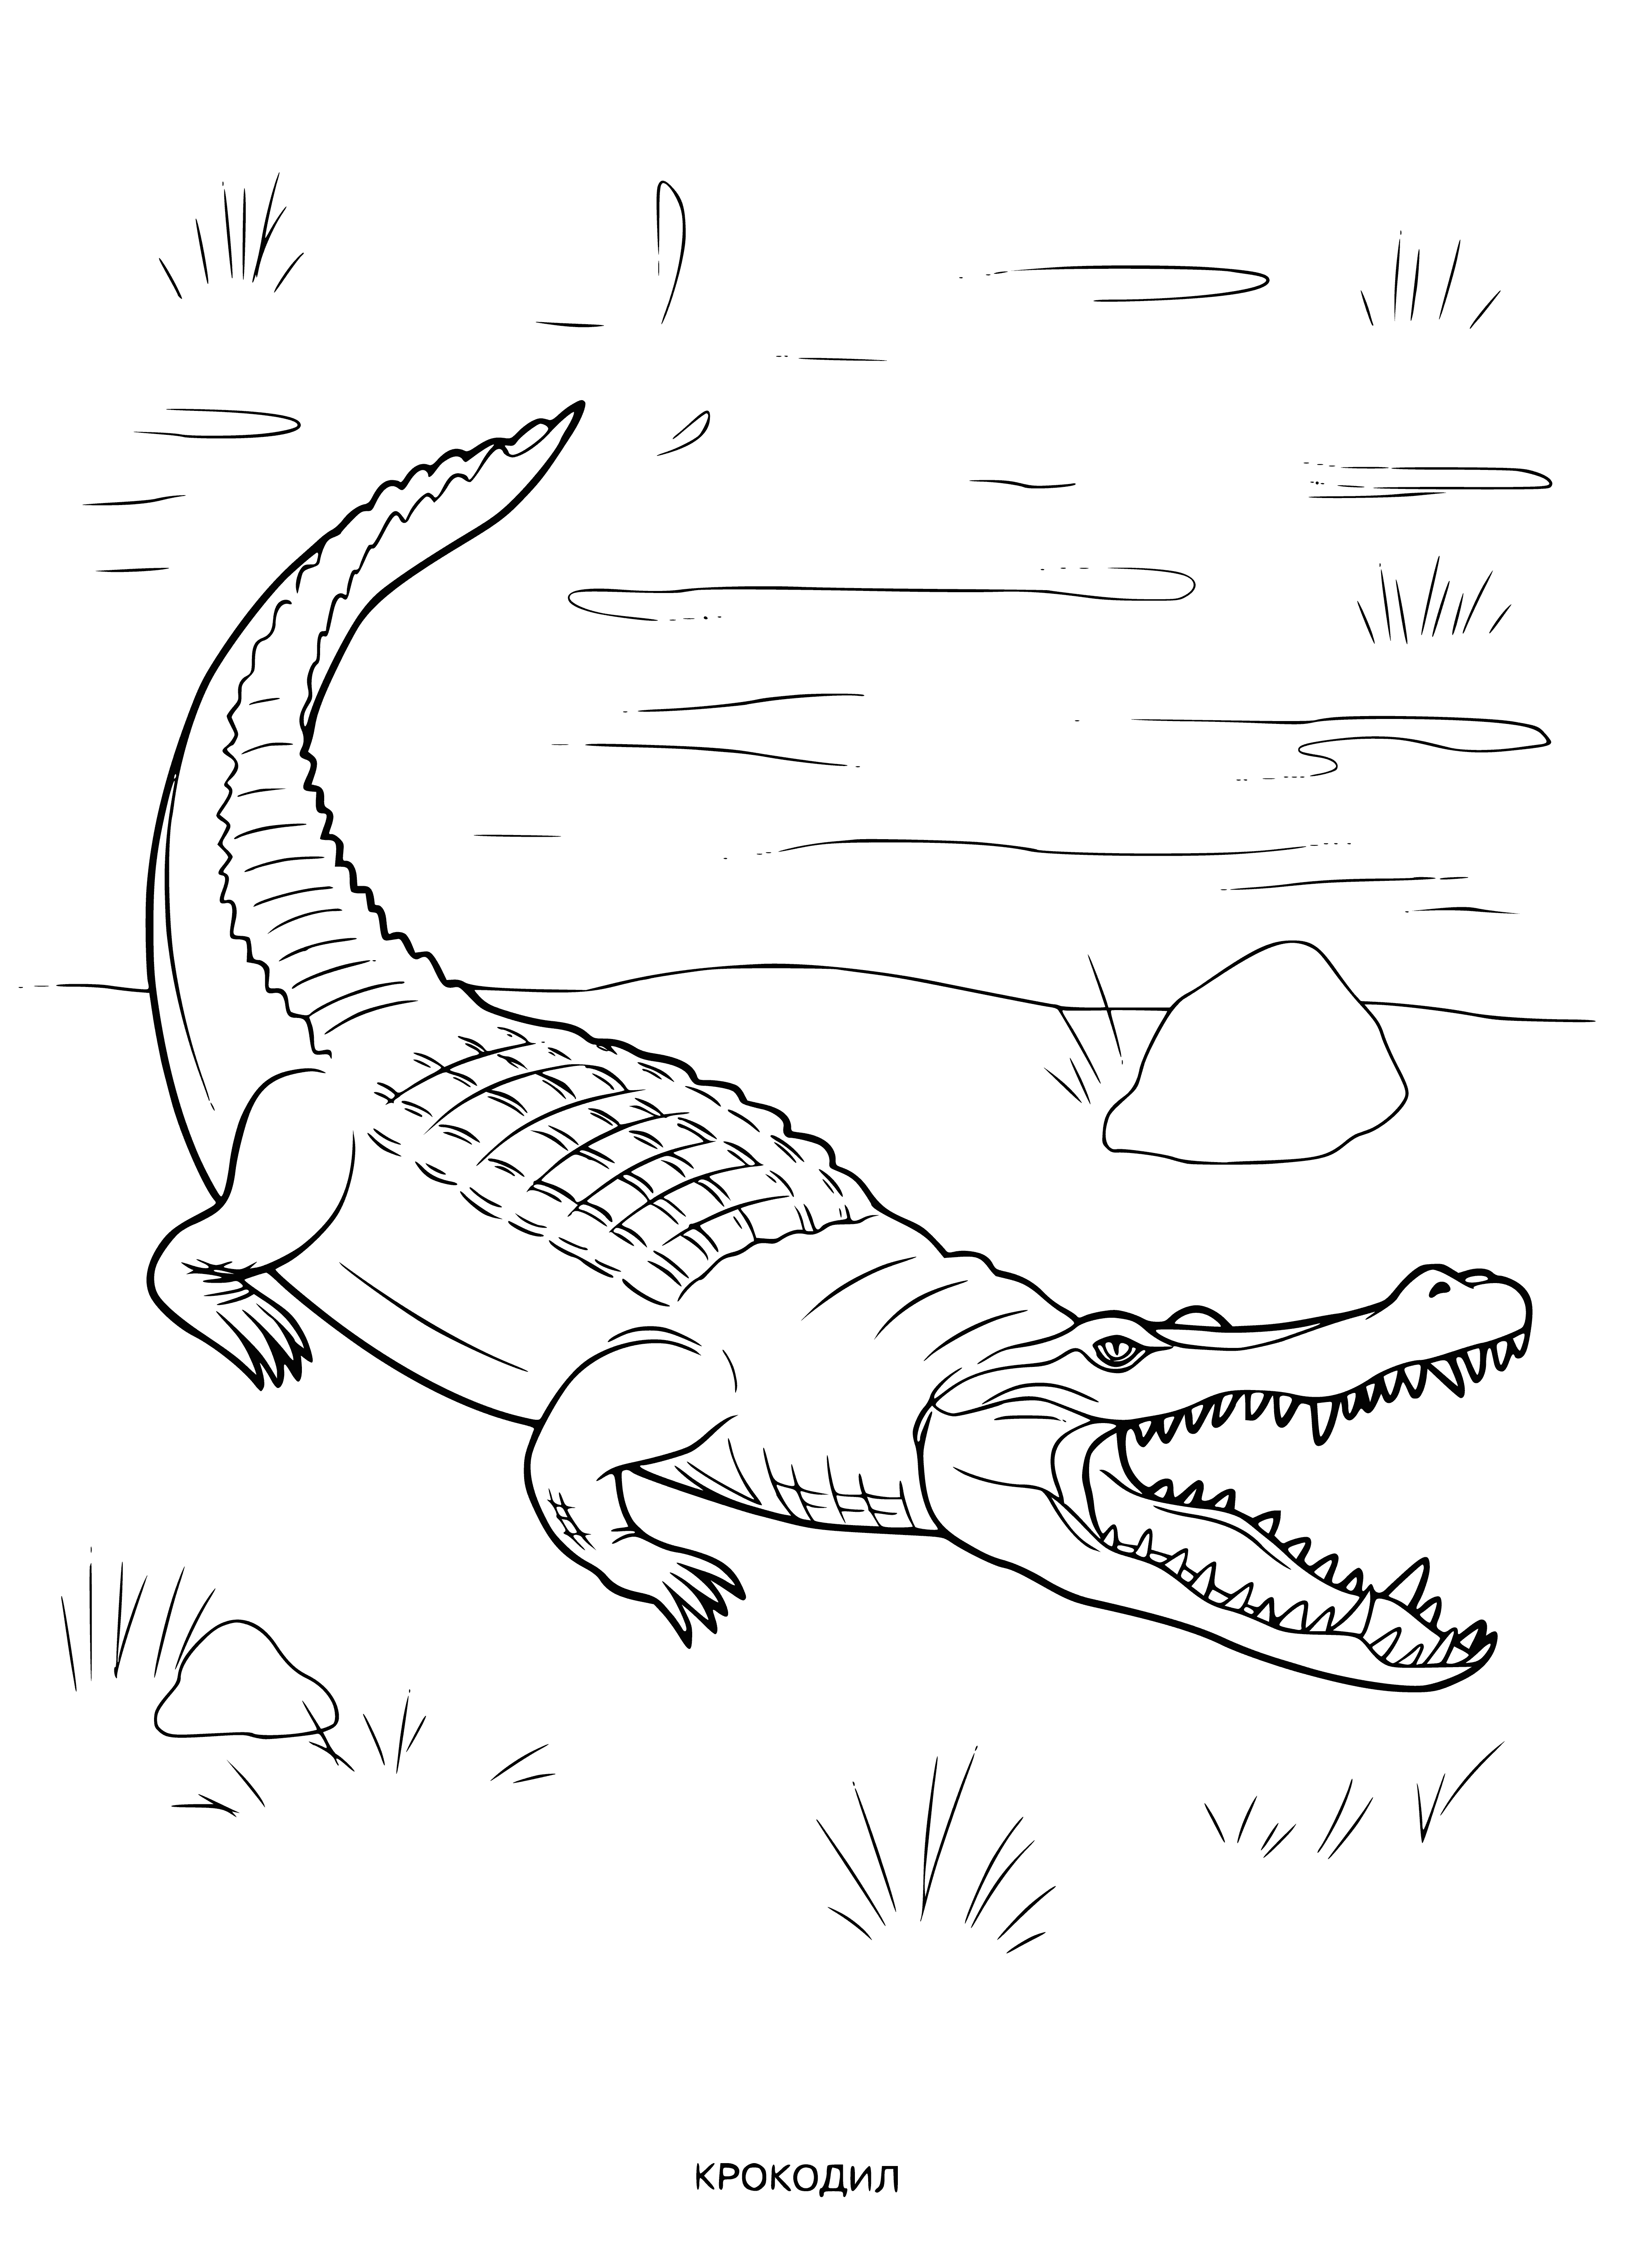 coloring page: Long, green and gray reptile sunning on a log in a swampy area - a crocodile with long tail and sharp teeth.